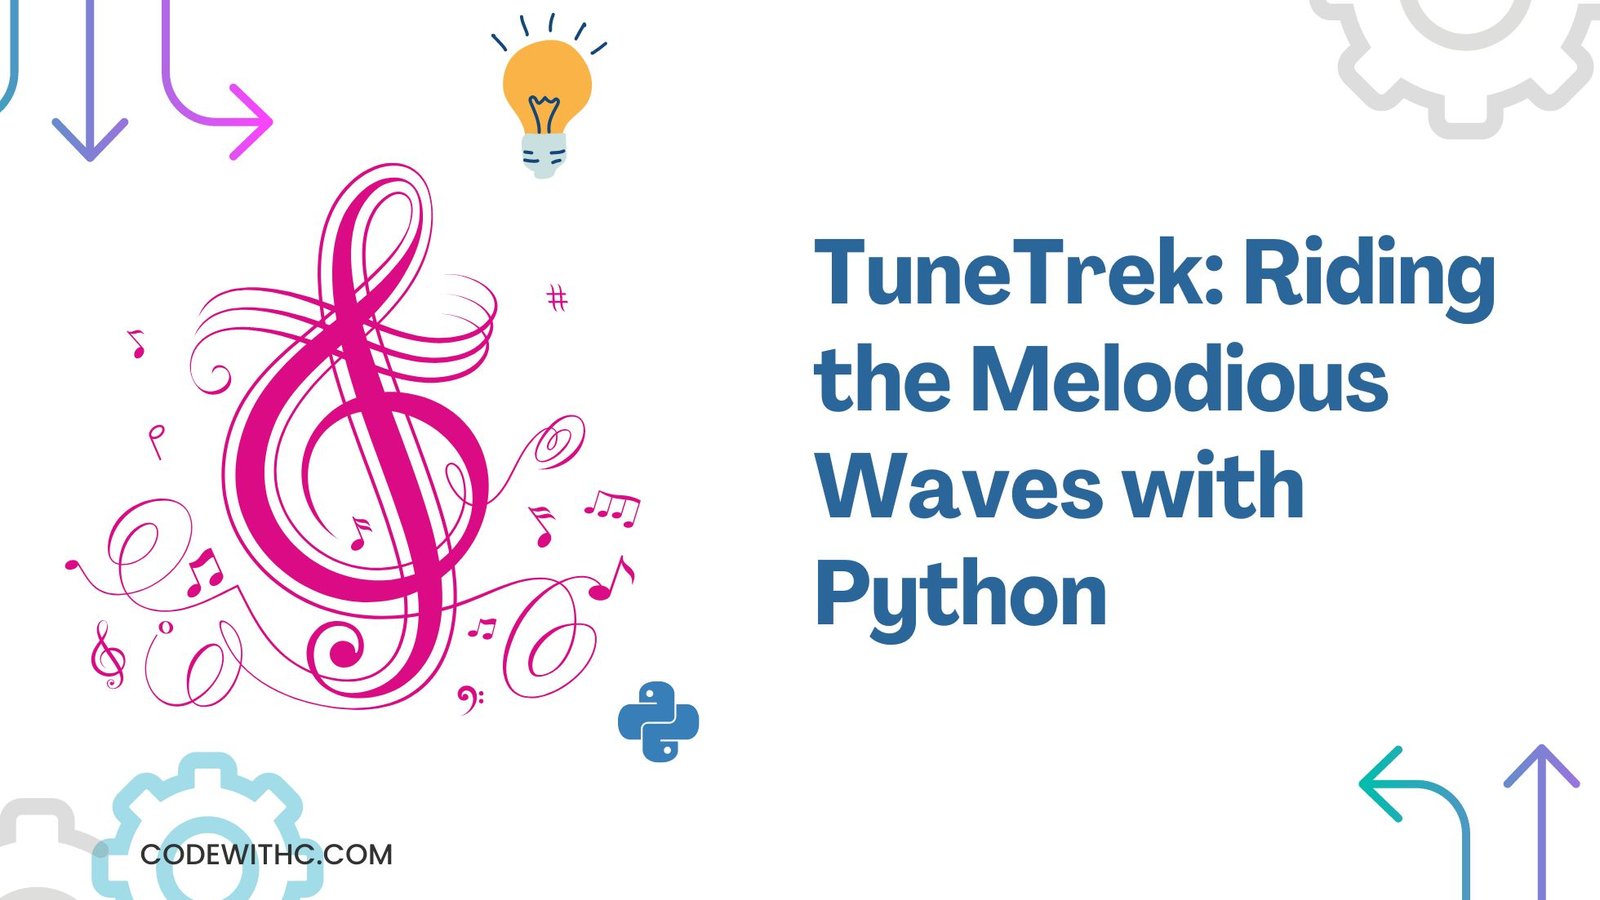 TuneTrek: Riding the Melodious Waves with Python